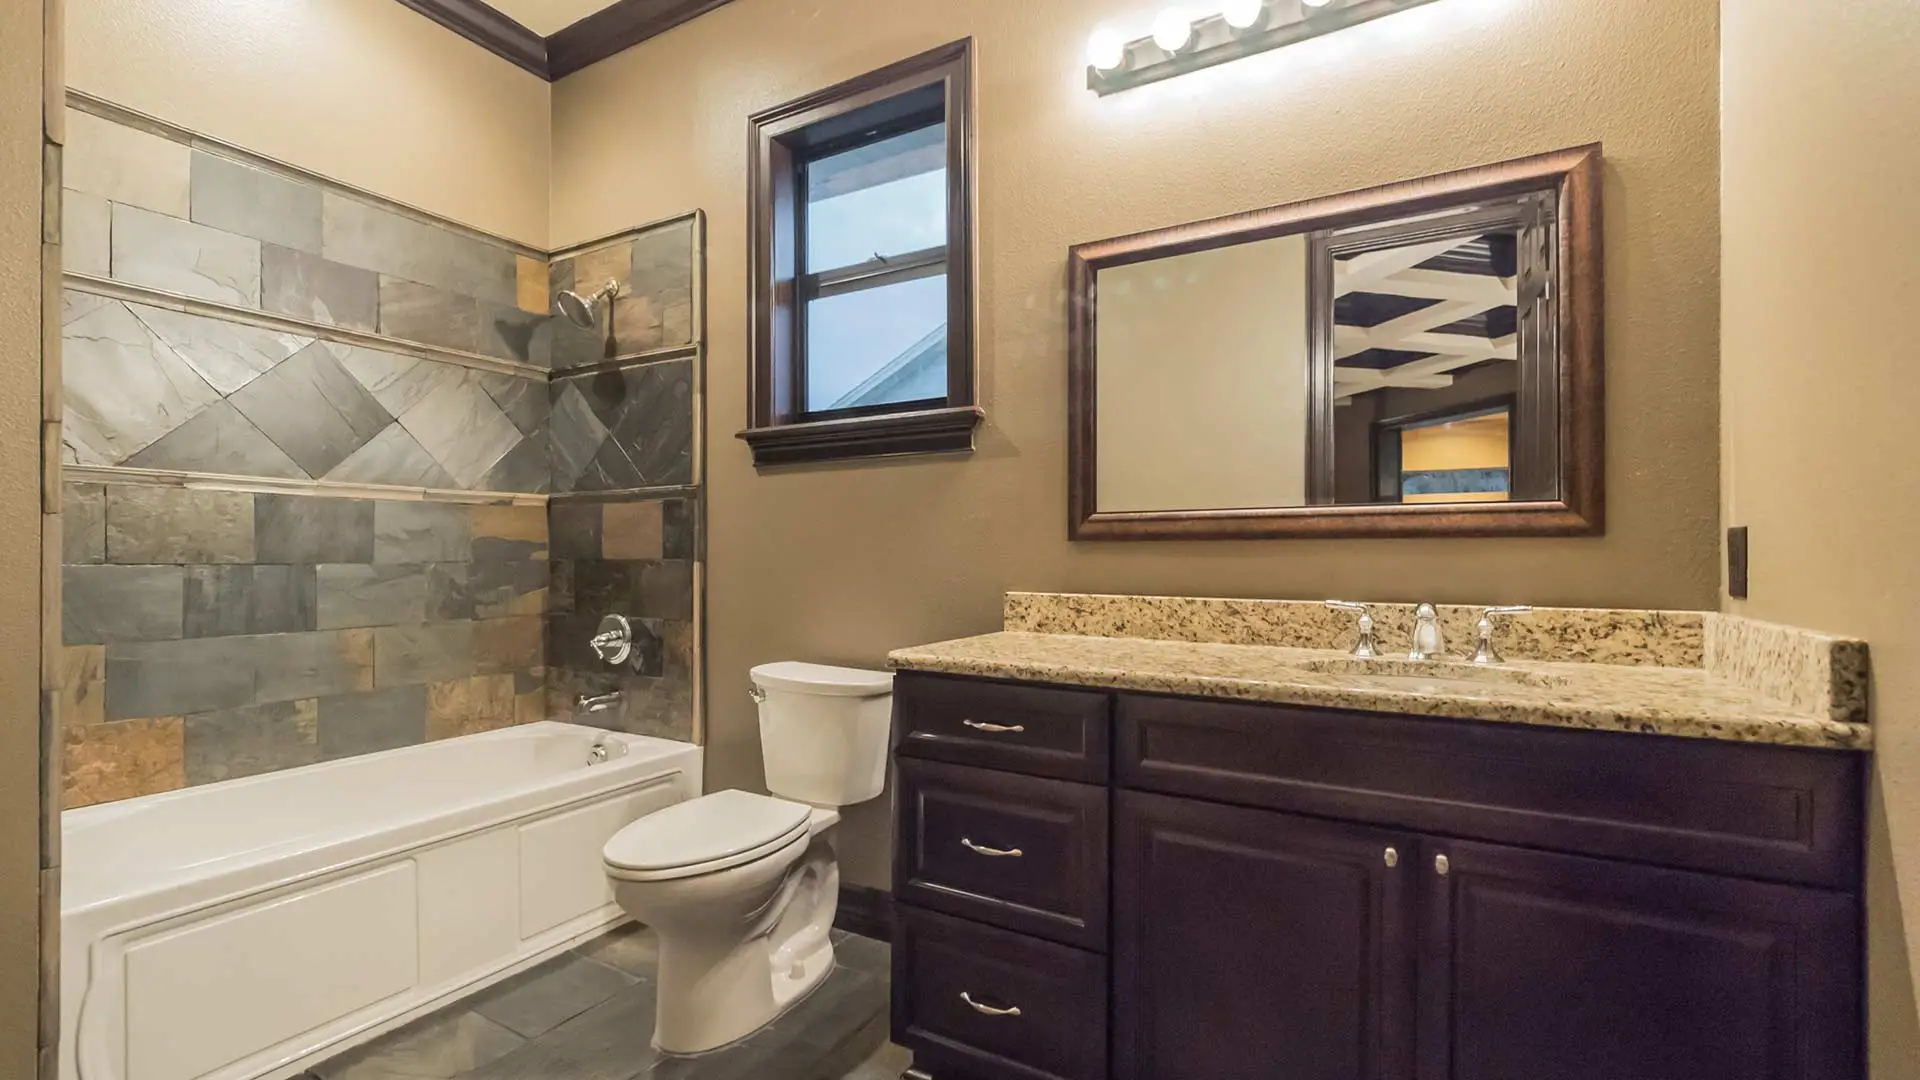 Example of a restored and remodeled bathroom by True Builders for a homeowner in Plant City.